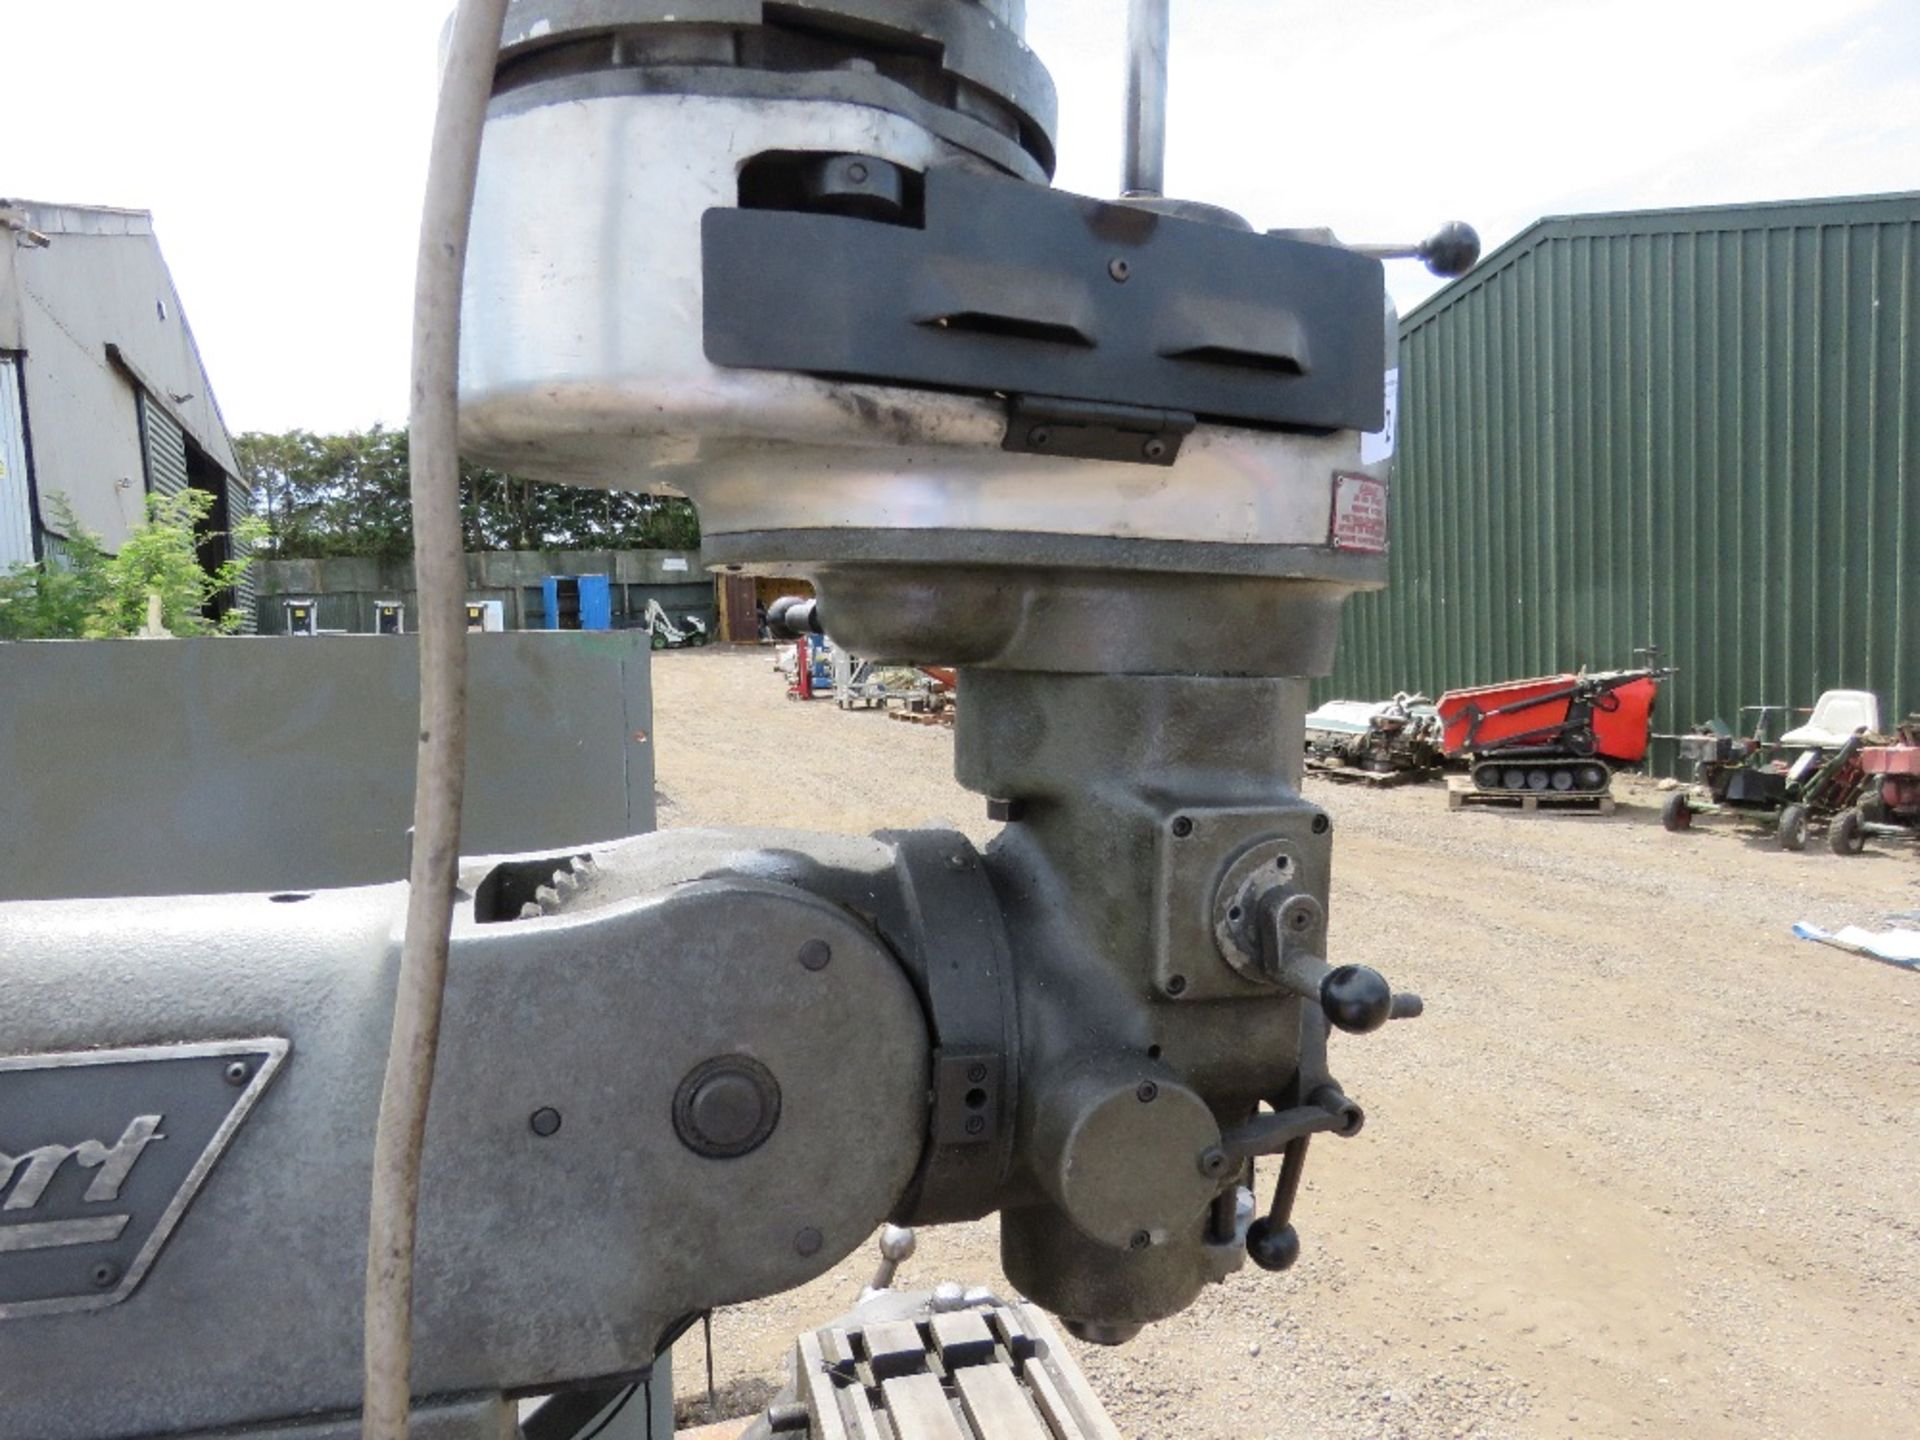 BRIDGEPORT MILLING MACHINE WITH CONTROLLER UNIT AS SHOWN. SOURCED FROM DEPOT CLOSURE. - Image 9 of 12